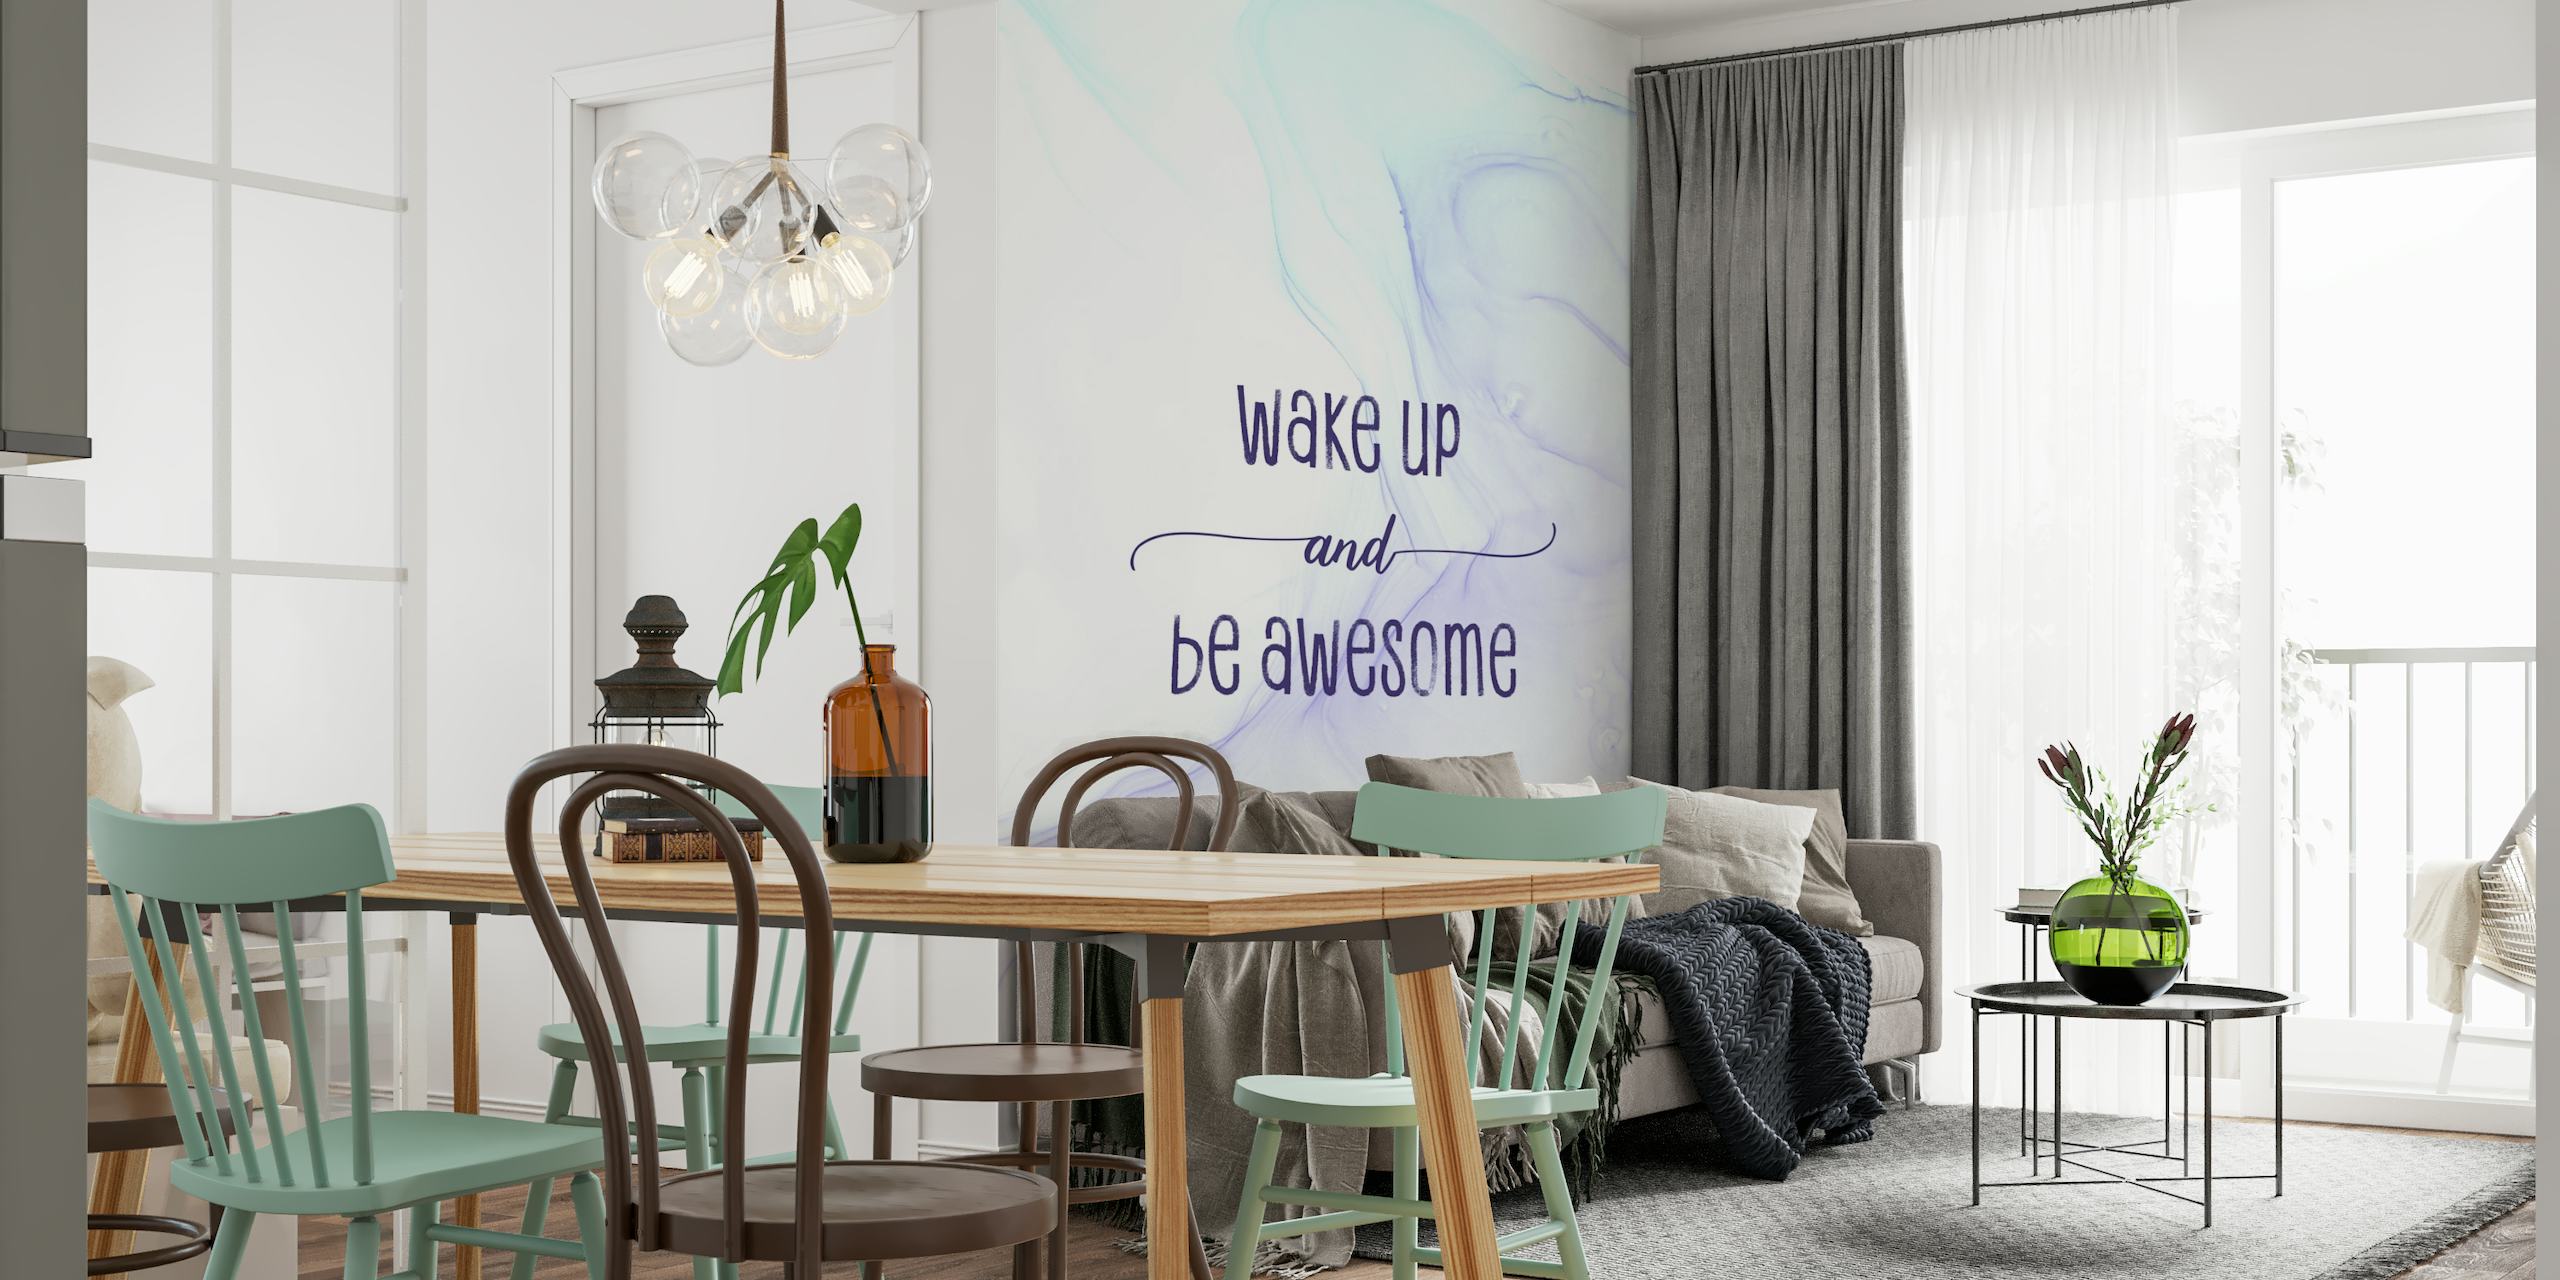 Wake up and be awesome wallpaper